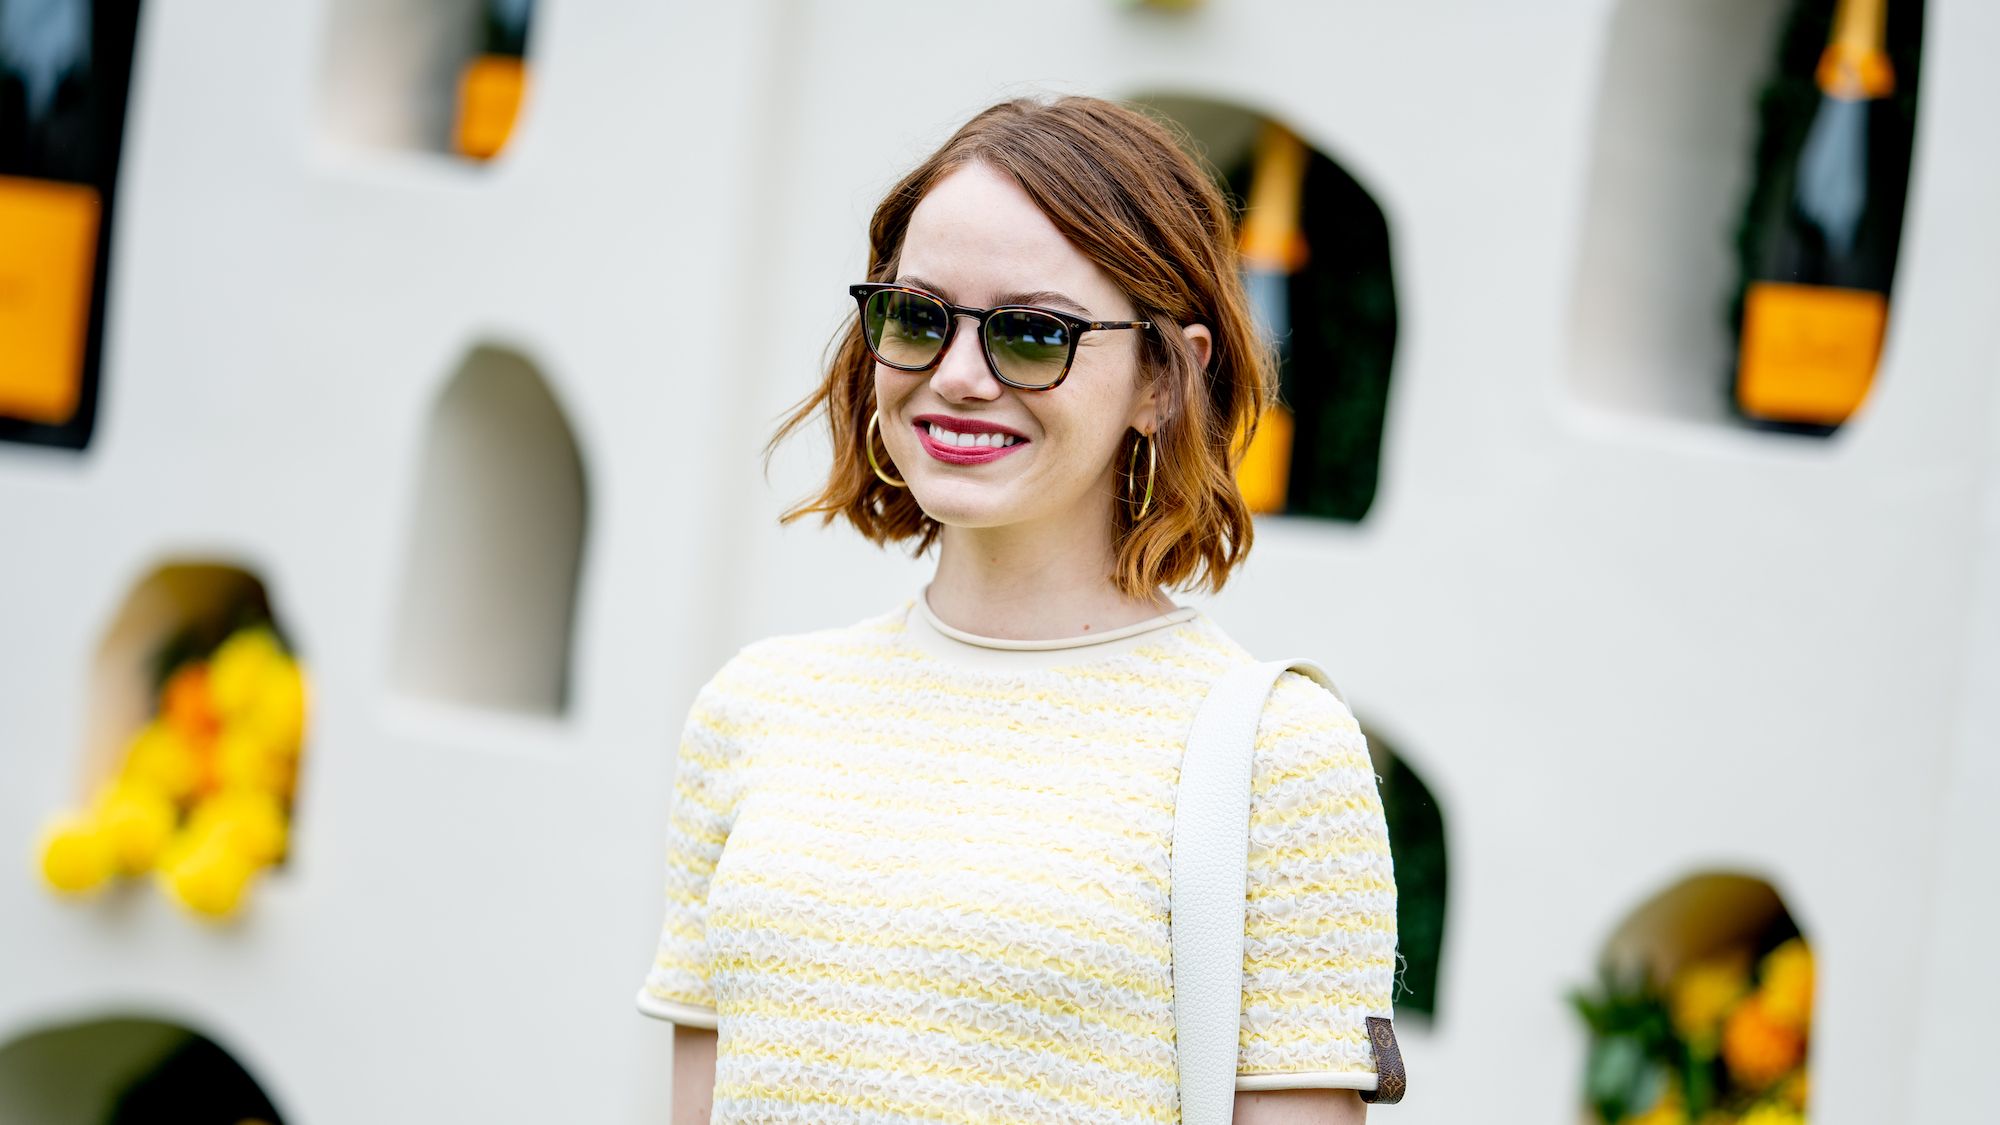 See Emma Stone Look Effortlessly Chic in a Yellow Top and Tiered Skirt